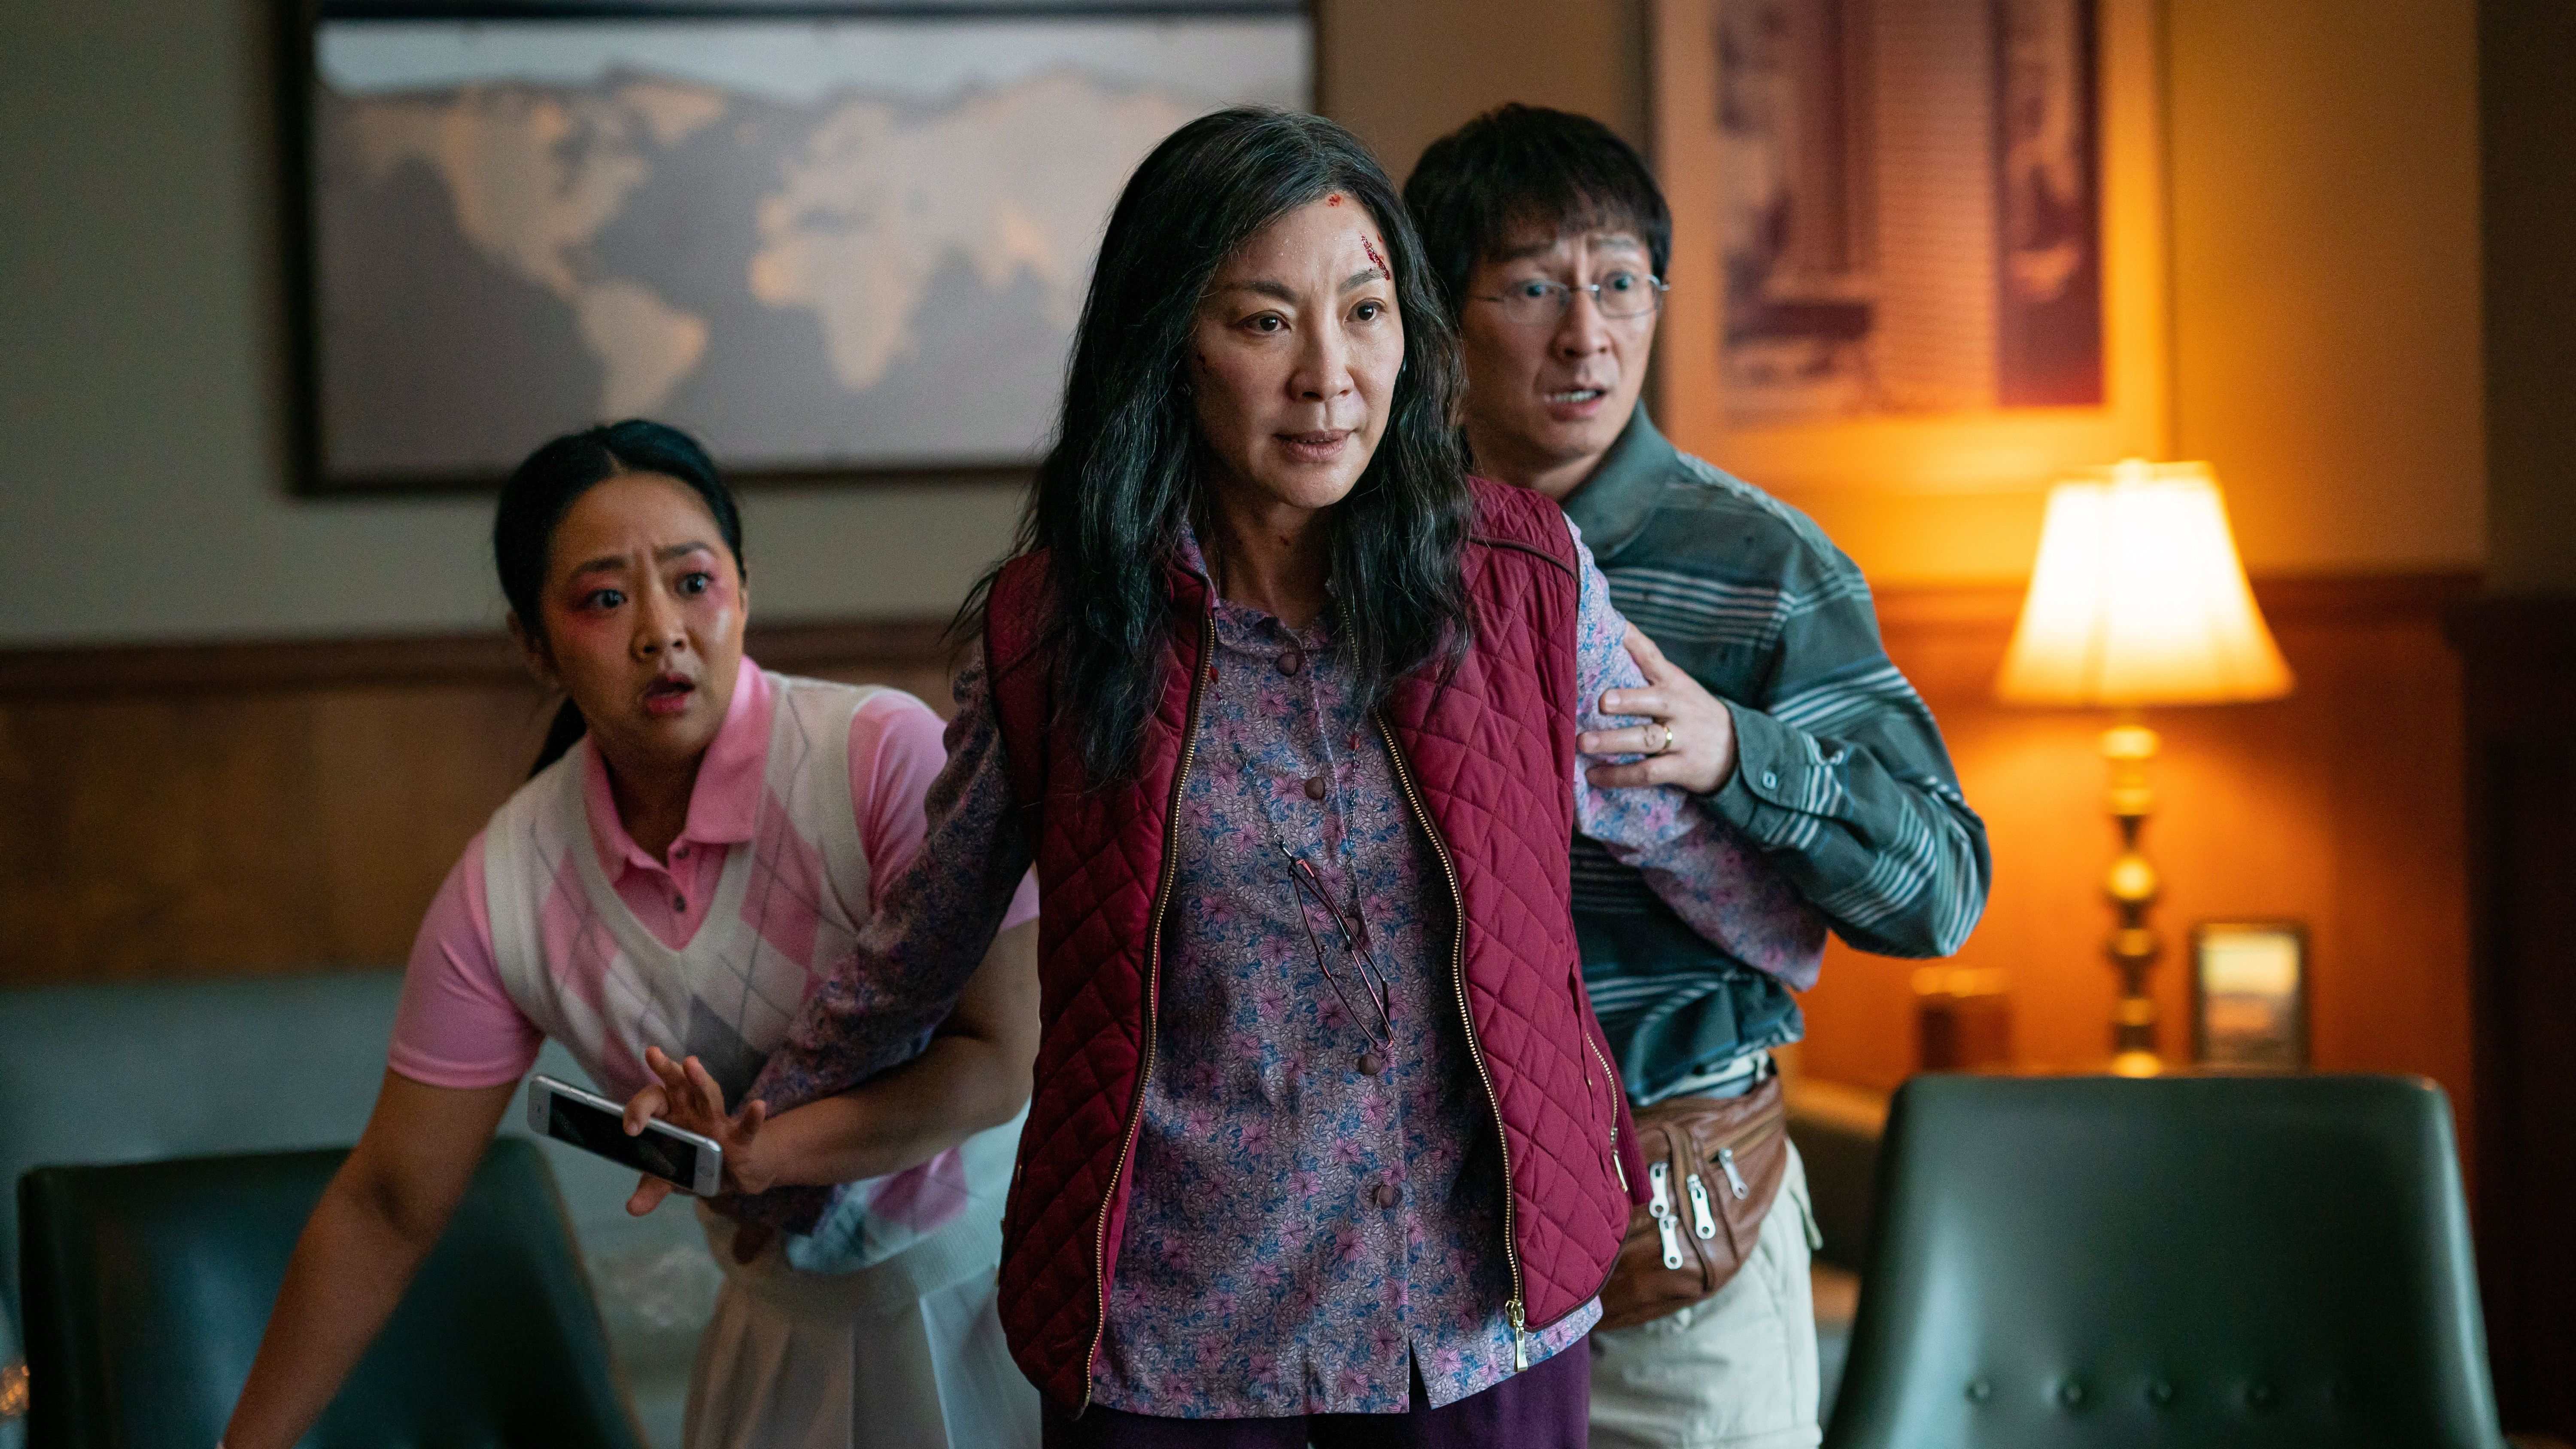 Michelle Yeoh on why 'Everything Everywhere All At Once' means so much